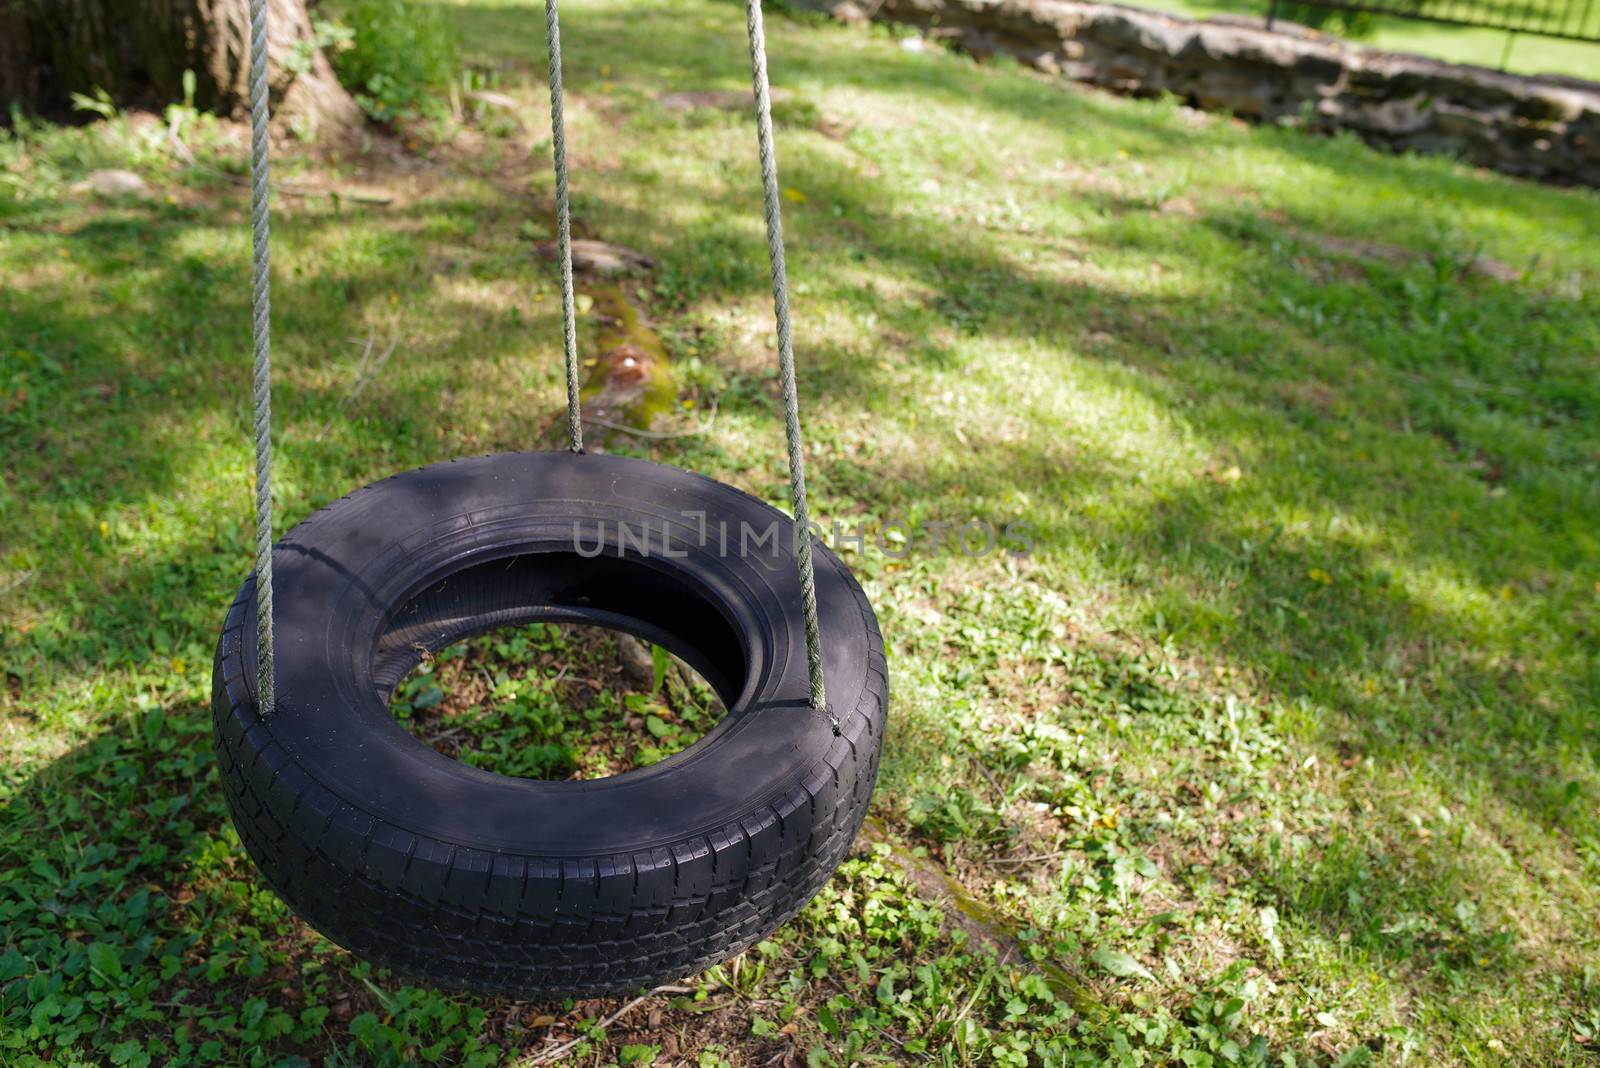 Tire swing hangs silen over a green grass yard, no people. Shot in natural light with copy space.